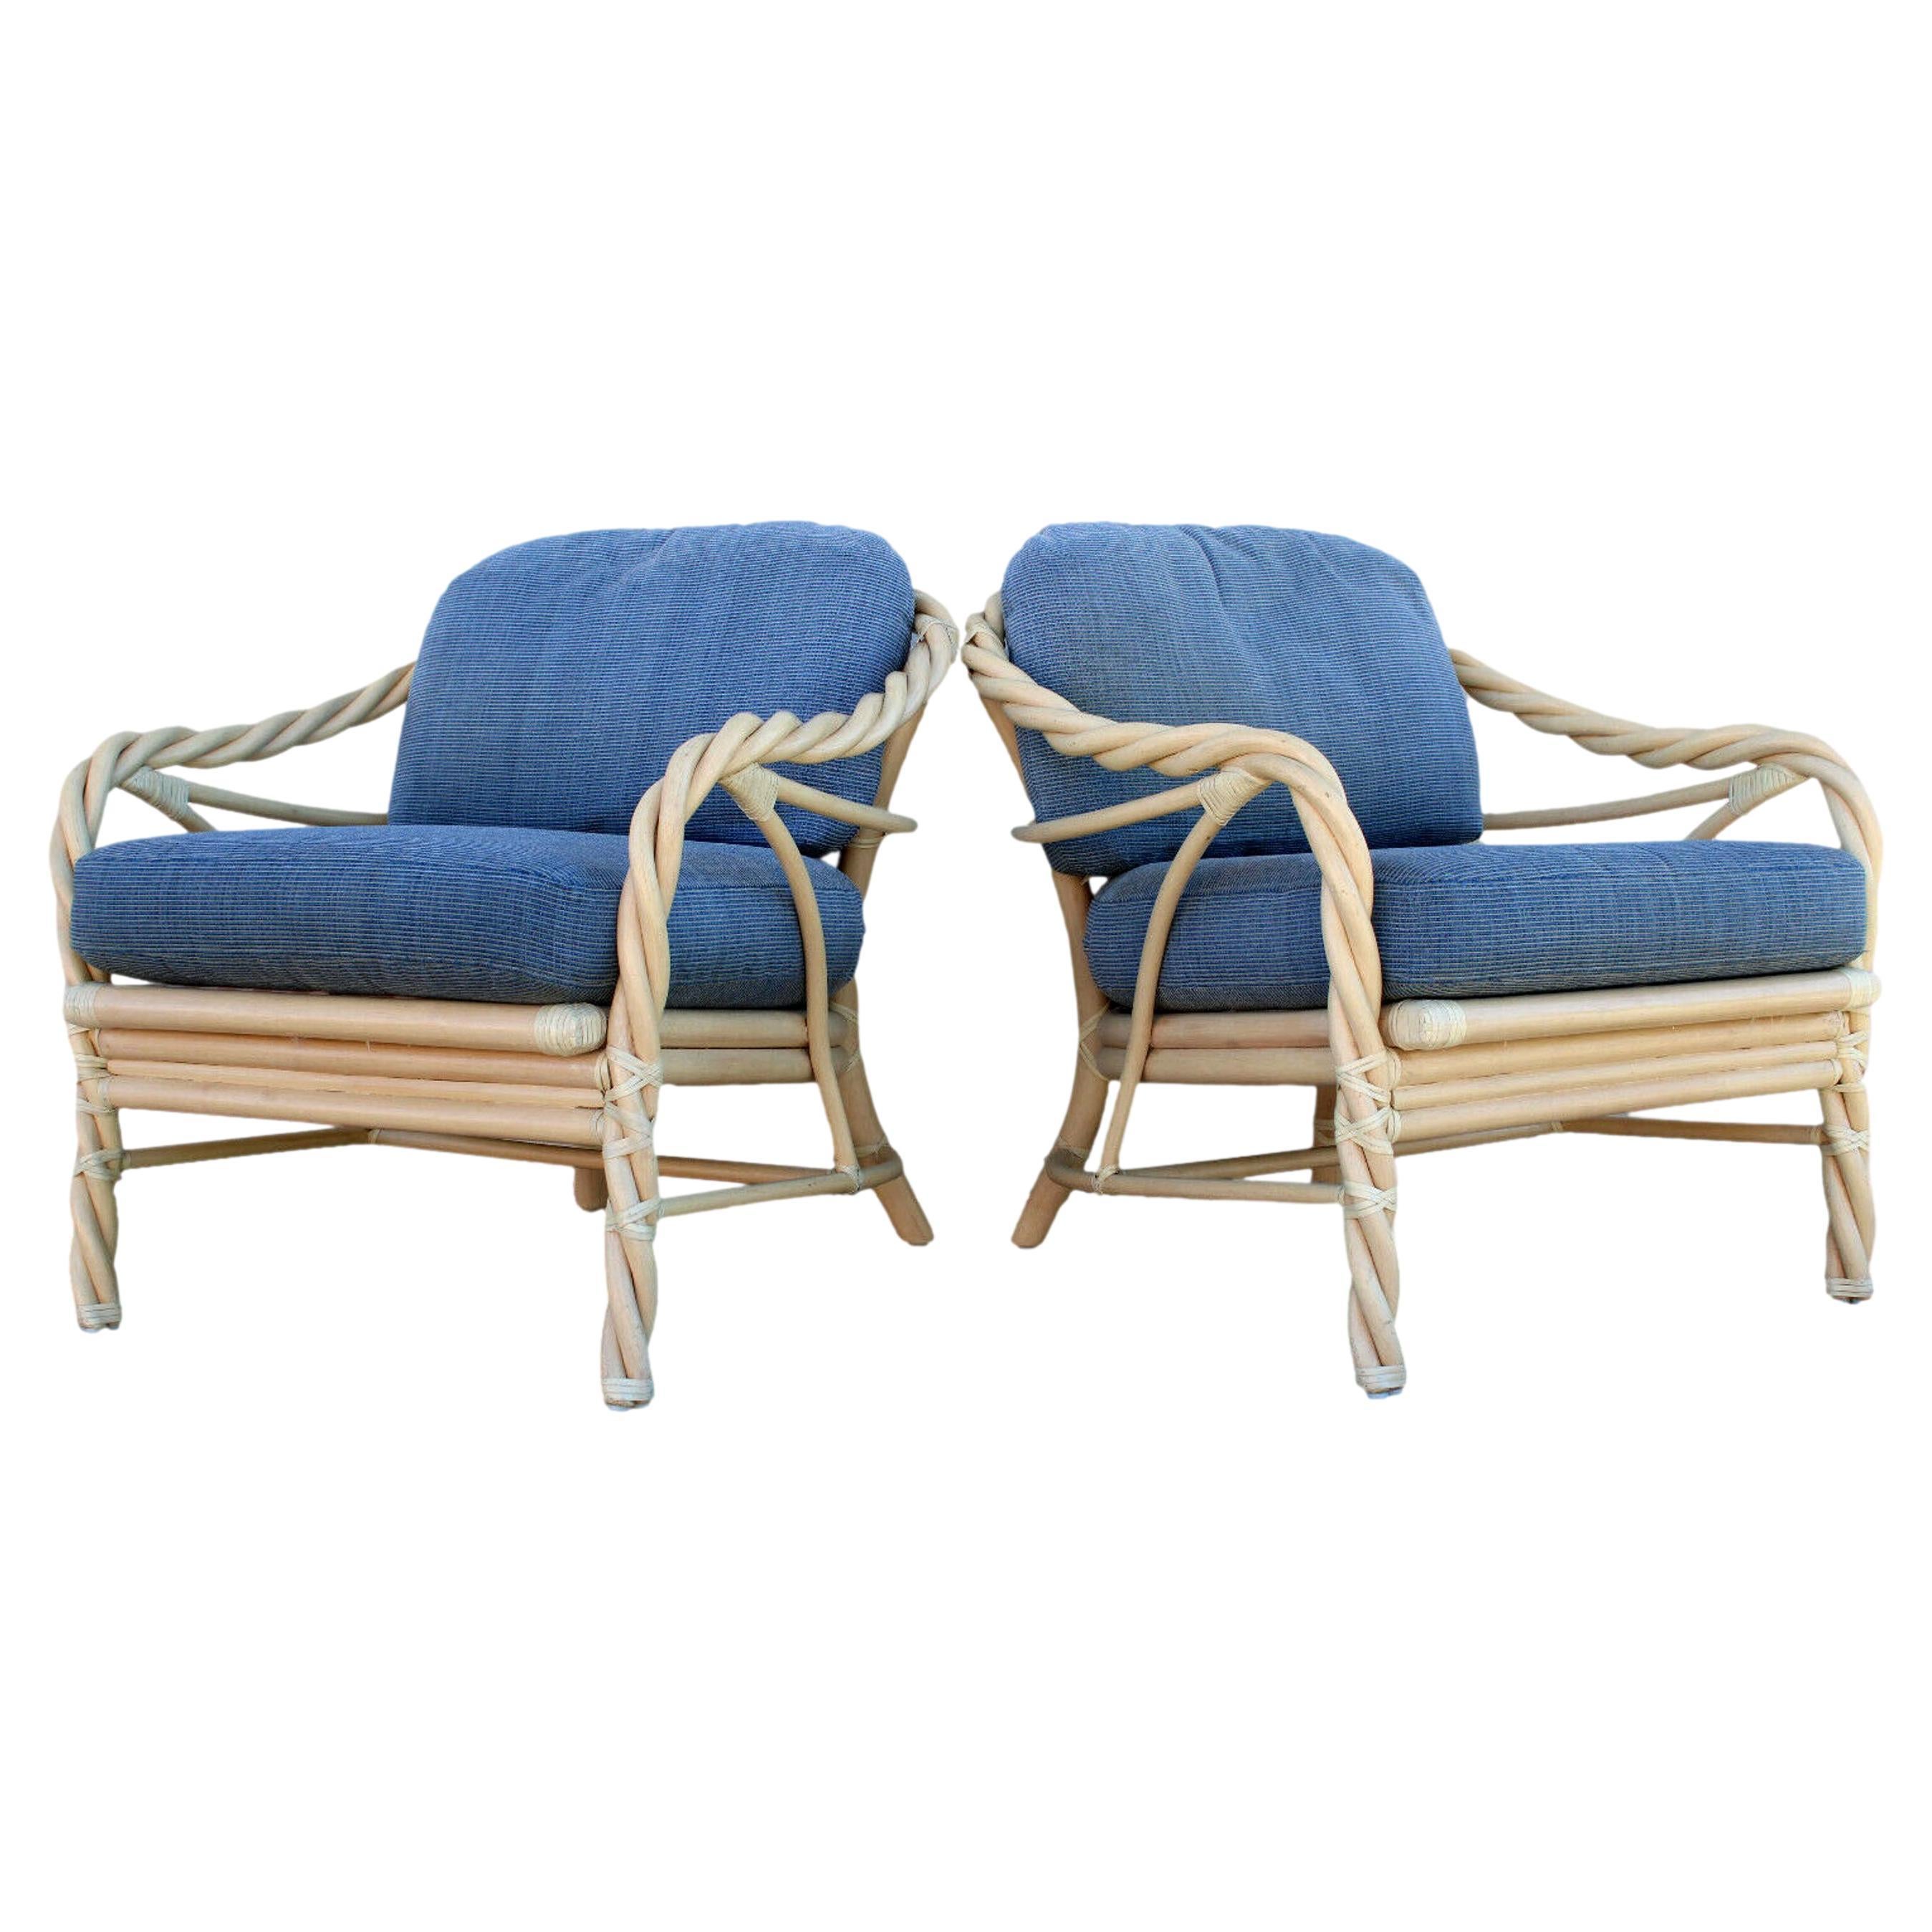 Pair of McGuire Twisted Rattan Lounge Chairs